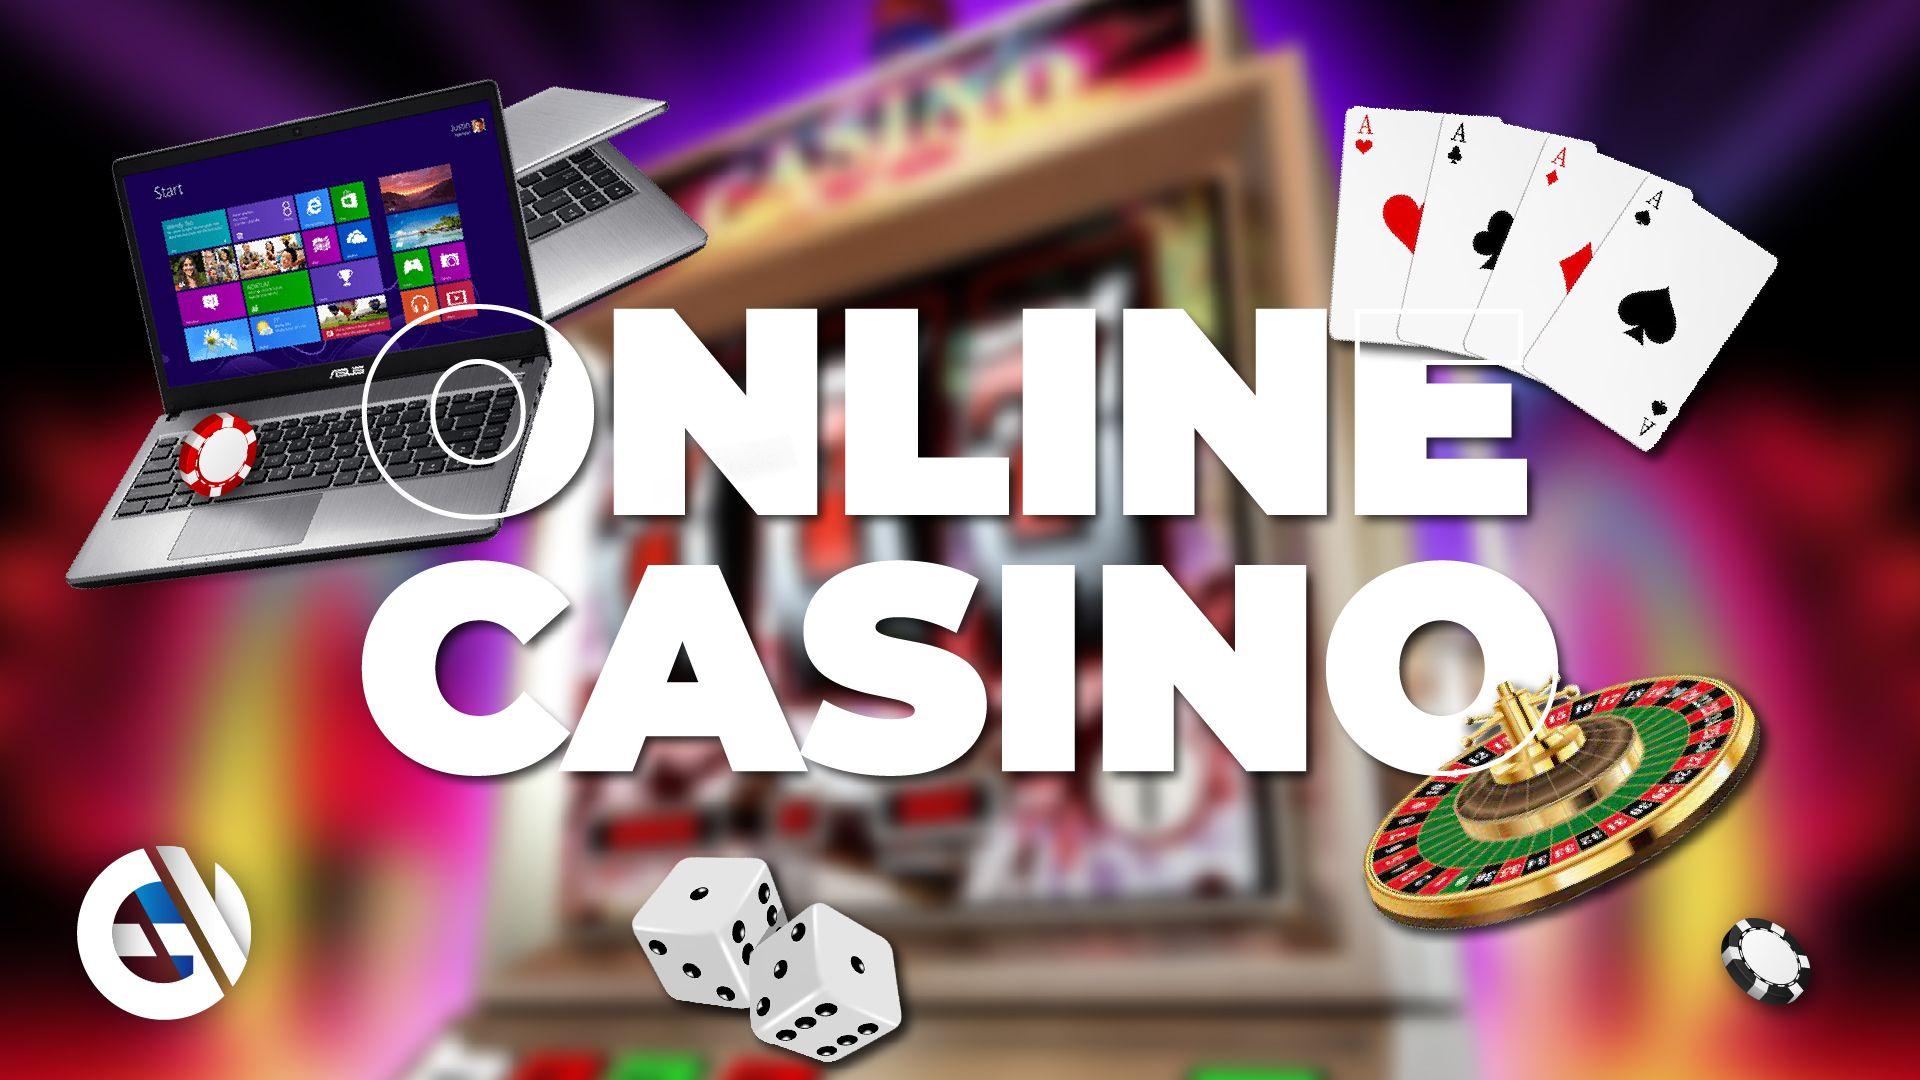 Online Casino Security: how to verify your gaming experience?